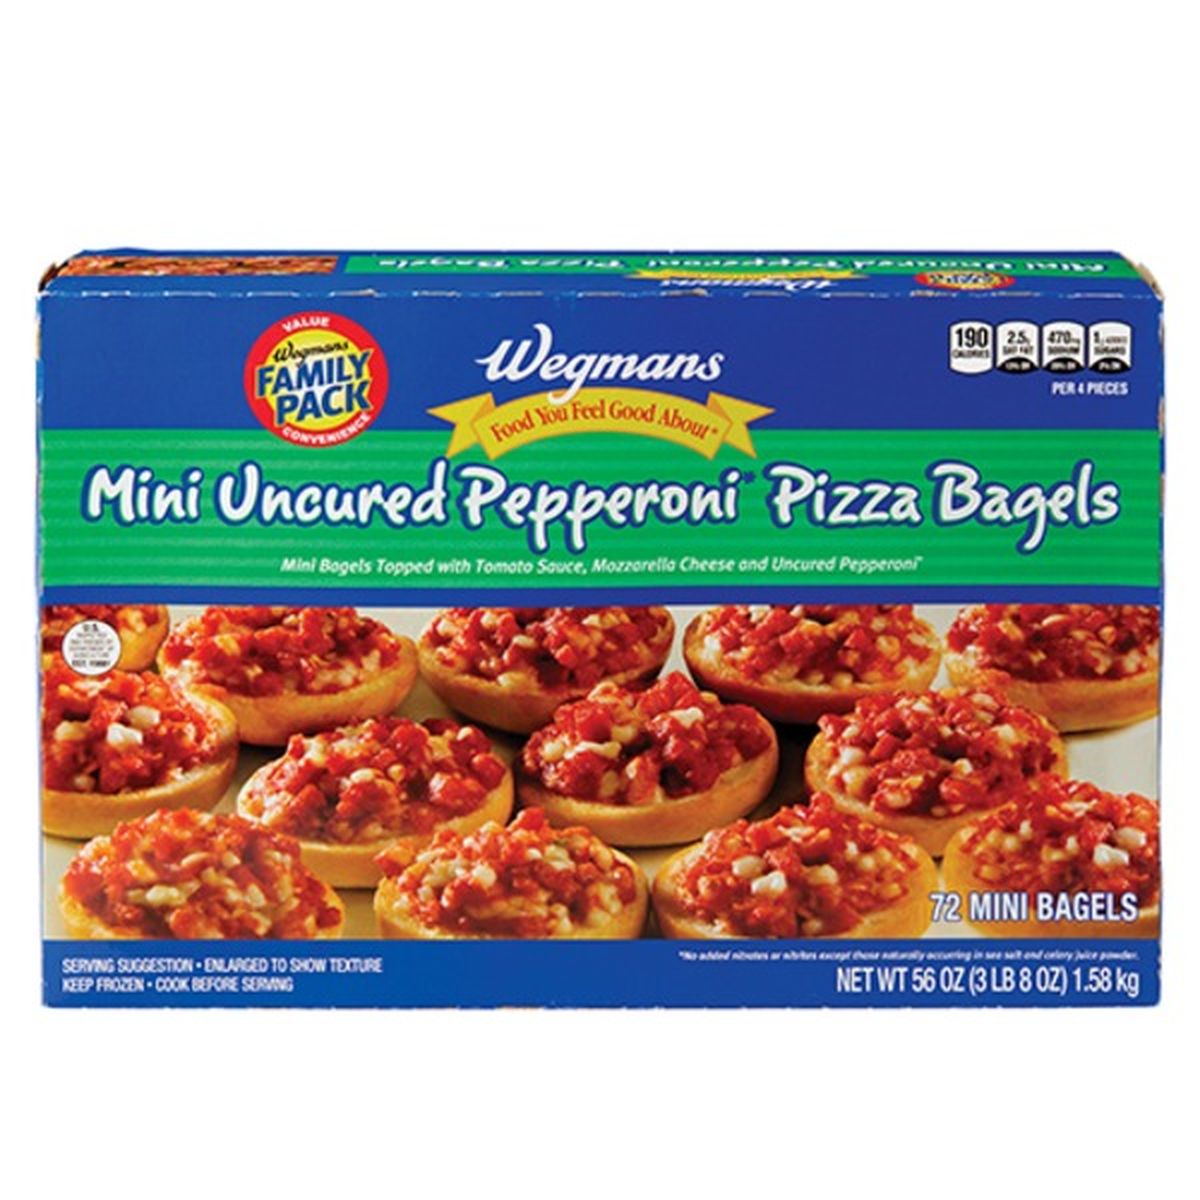 Calories in Wegmans Mini Uncured Pepperoni Pizza Bagels, FAMILY PACK